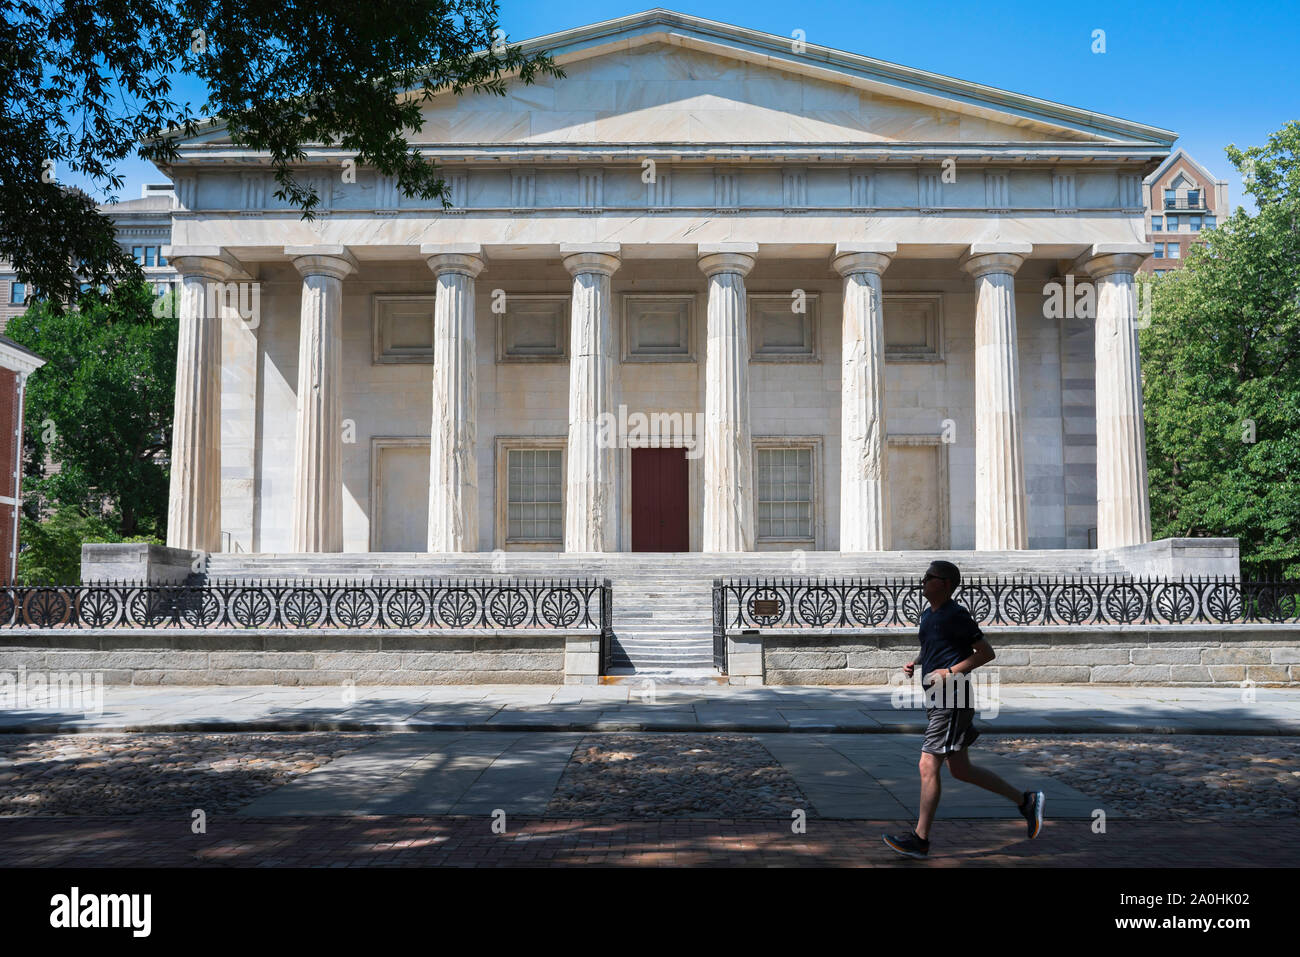 Second Bank US Philadelphia,view of the Greek Revival style Second Bank Of The United States (1824) in the Philadelphia National Historical Park, USA Stock Photo